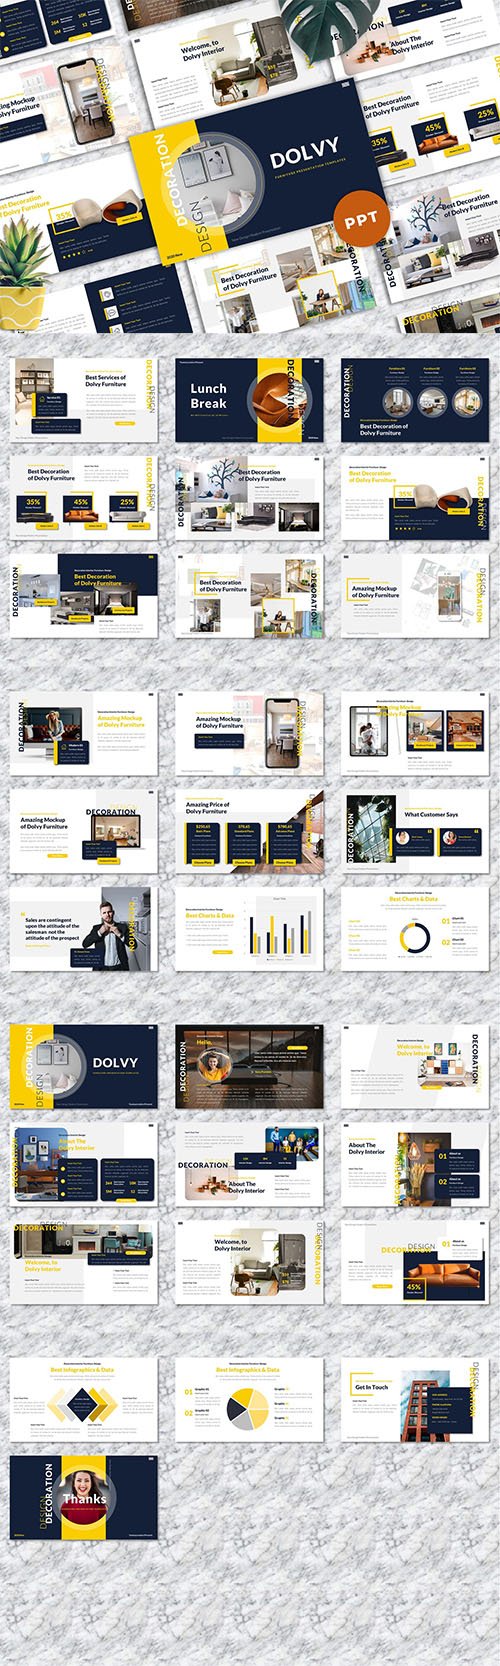 Dolvy - Furniture Powerpoint Templates